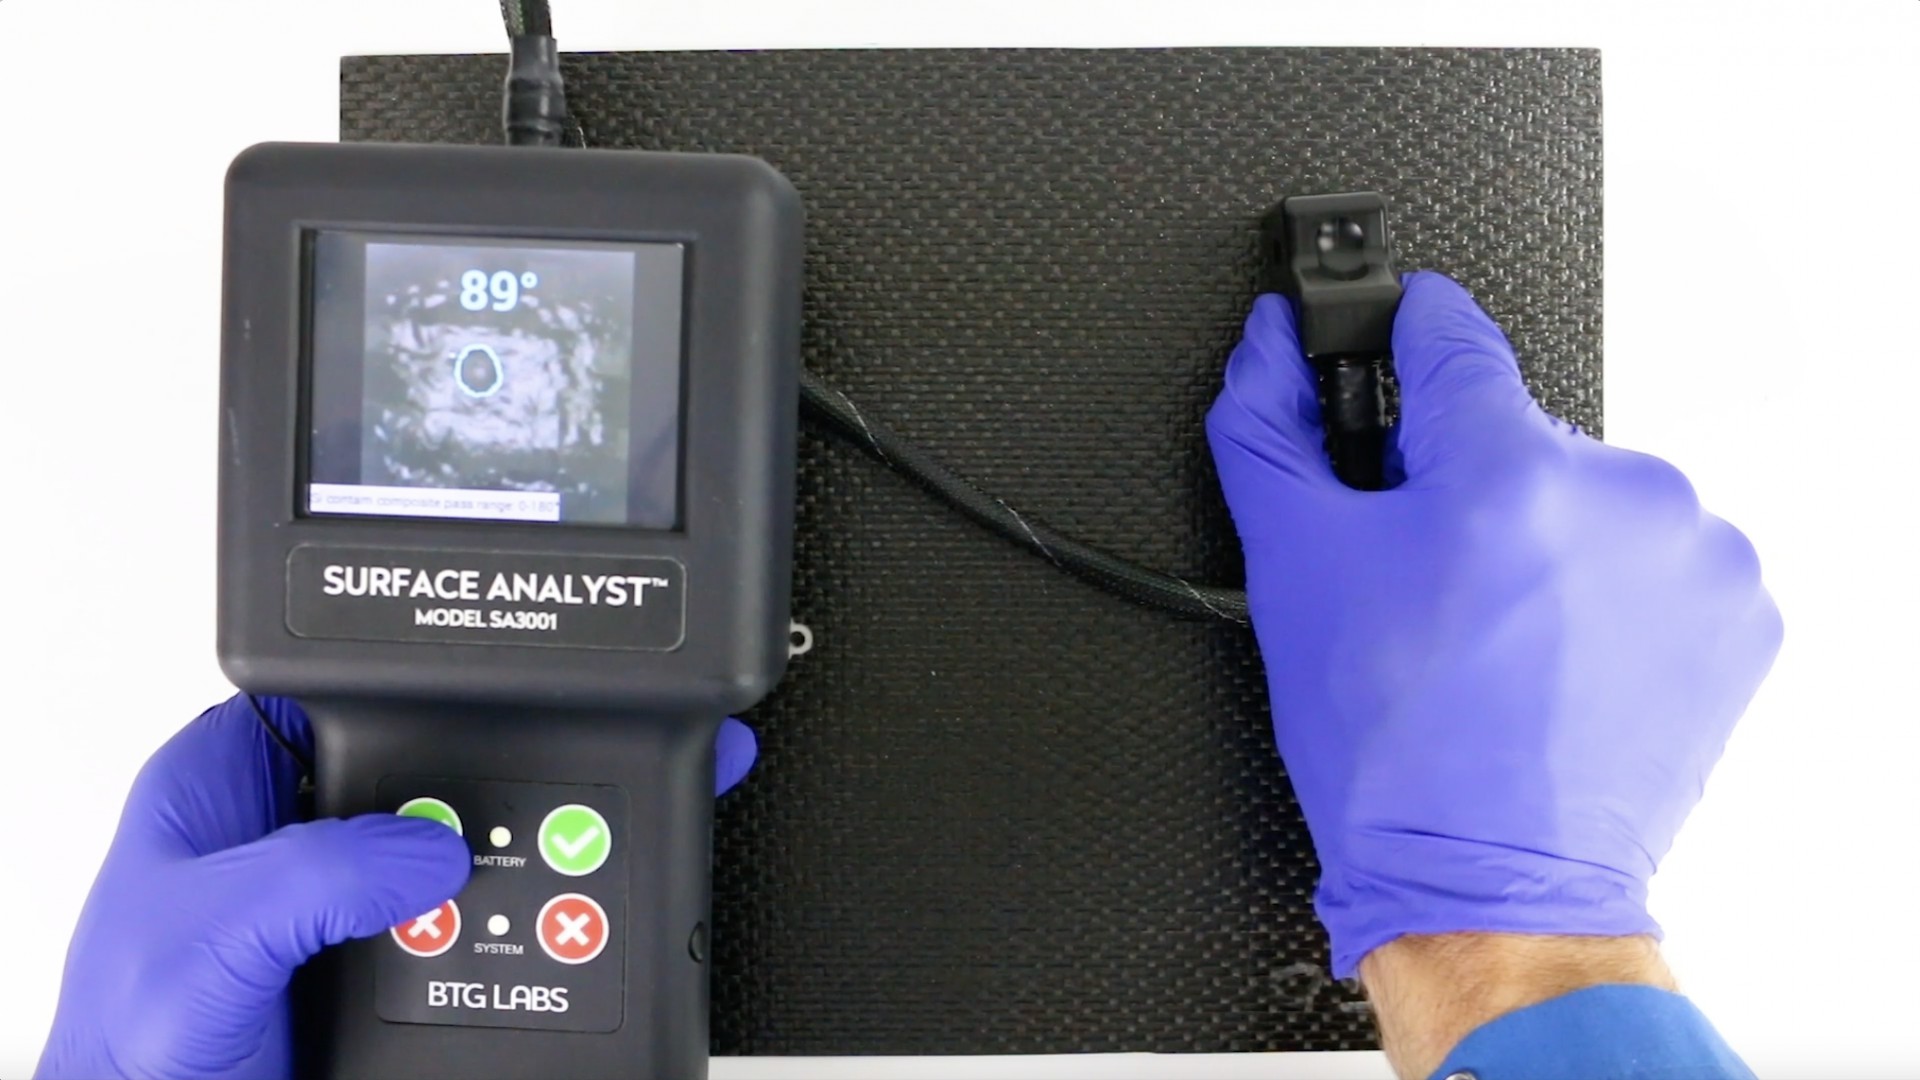 BTG Labs' Surface Analyst™ Instantly Measures Contact Angle to Determine the Potential Adhesive Strength of Bonds